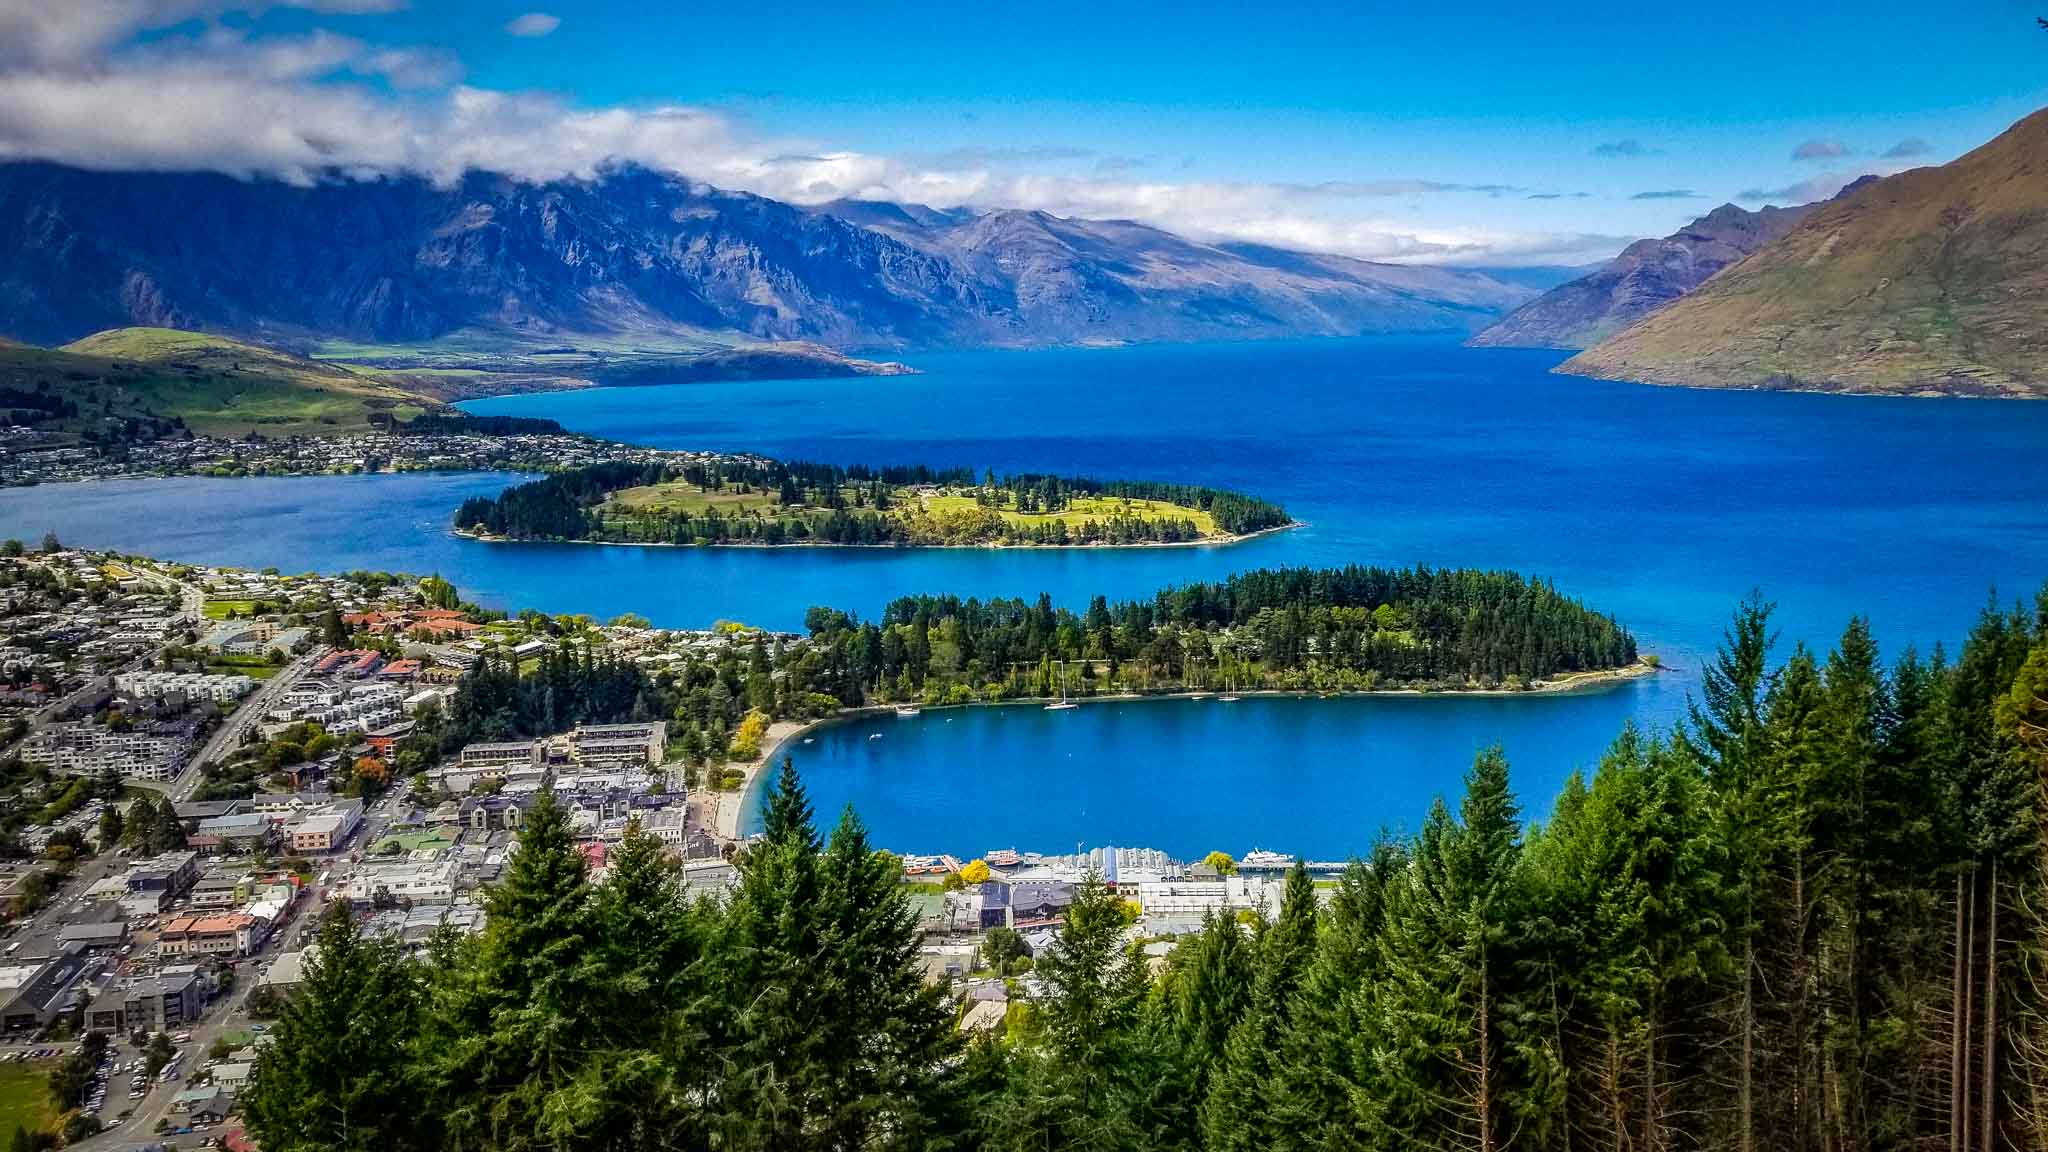 For adrenaline junkies and nature lovers alike, Queenstown offers an unparalleled playground of adventure amidst breathtaking landscapes. From bungee jumping and skydiving to hiking and jet boating, experience the thrill of outdoor activities against the backdrop of snow-capped mountains and pristine lakes]]>